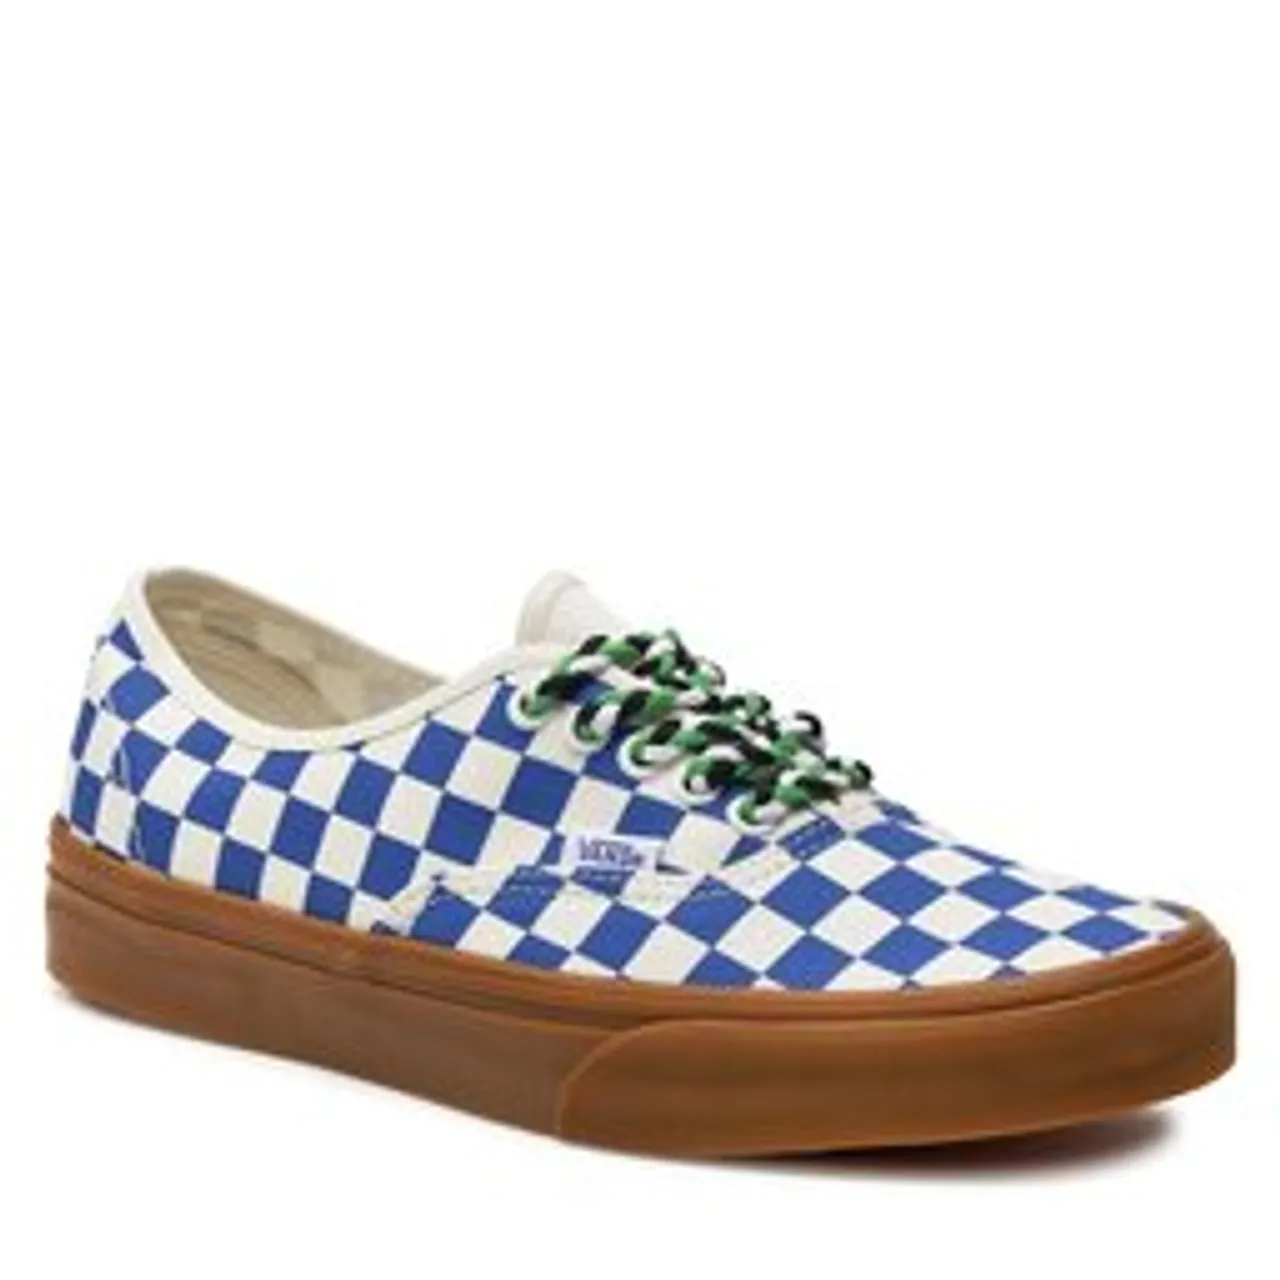 Sneakers aus Stoff Vans Authentic VN0009PVY6Z1 Blue/White